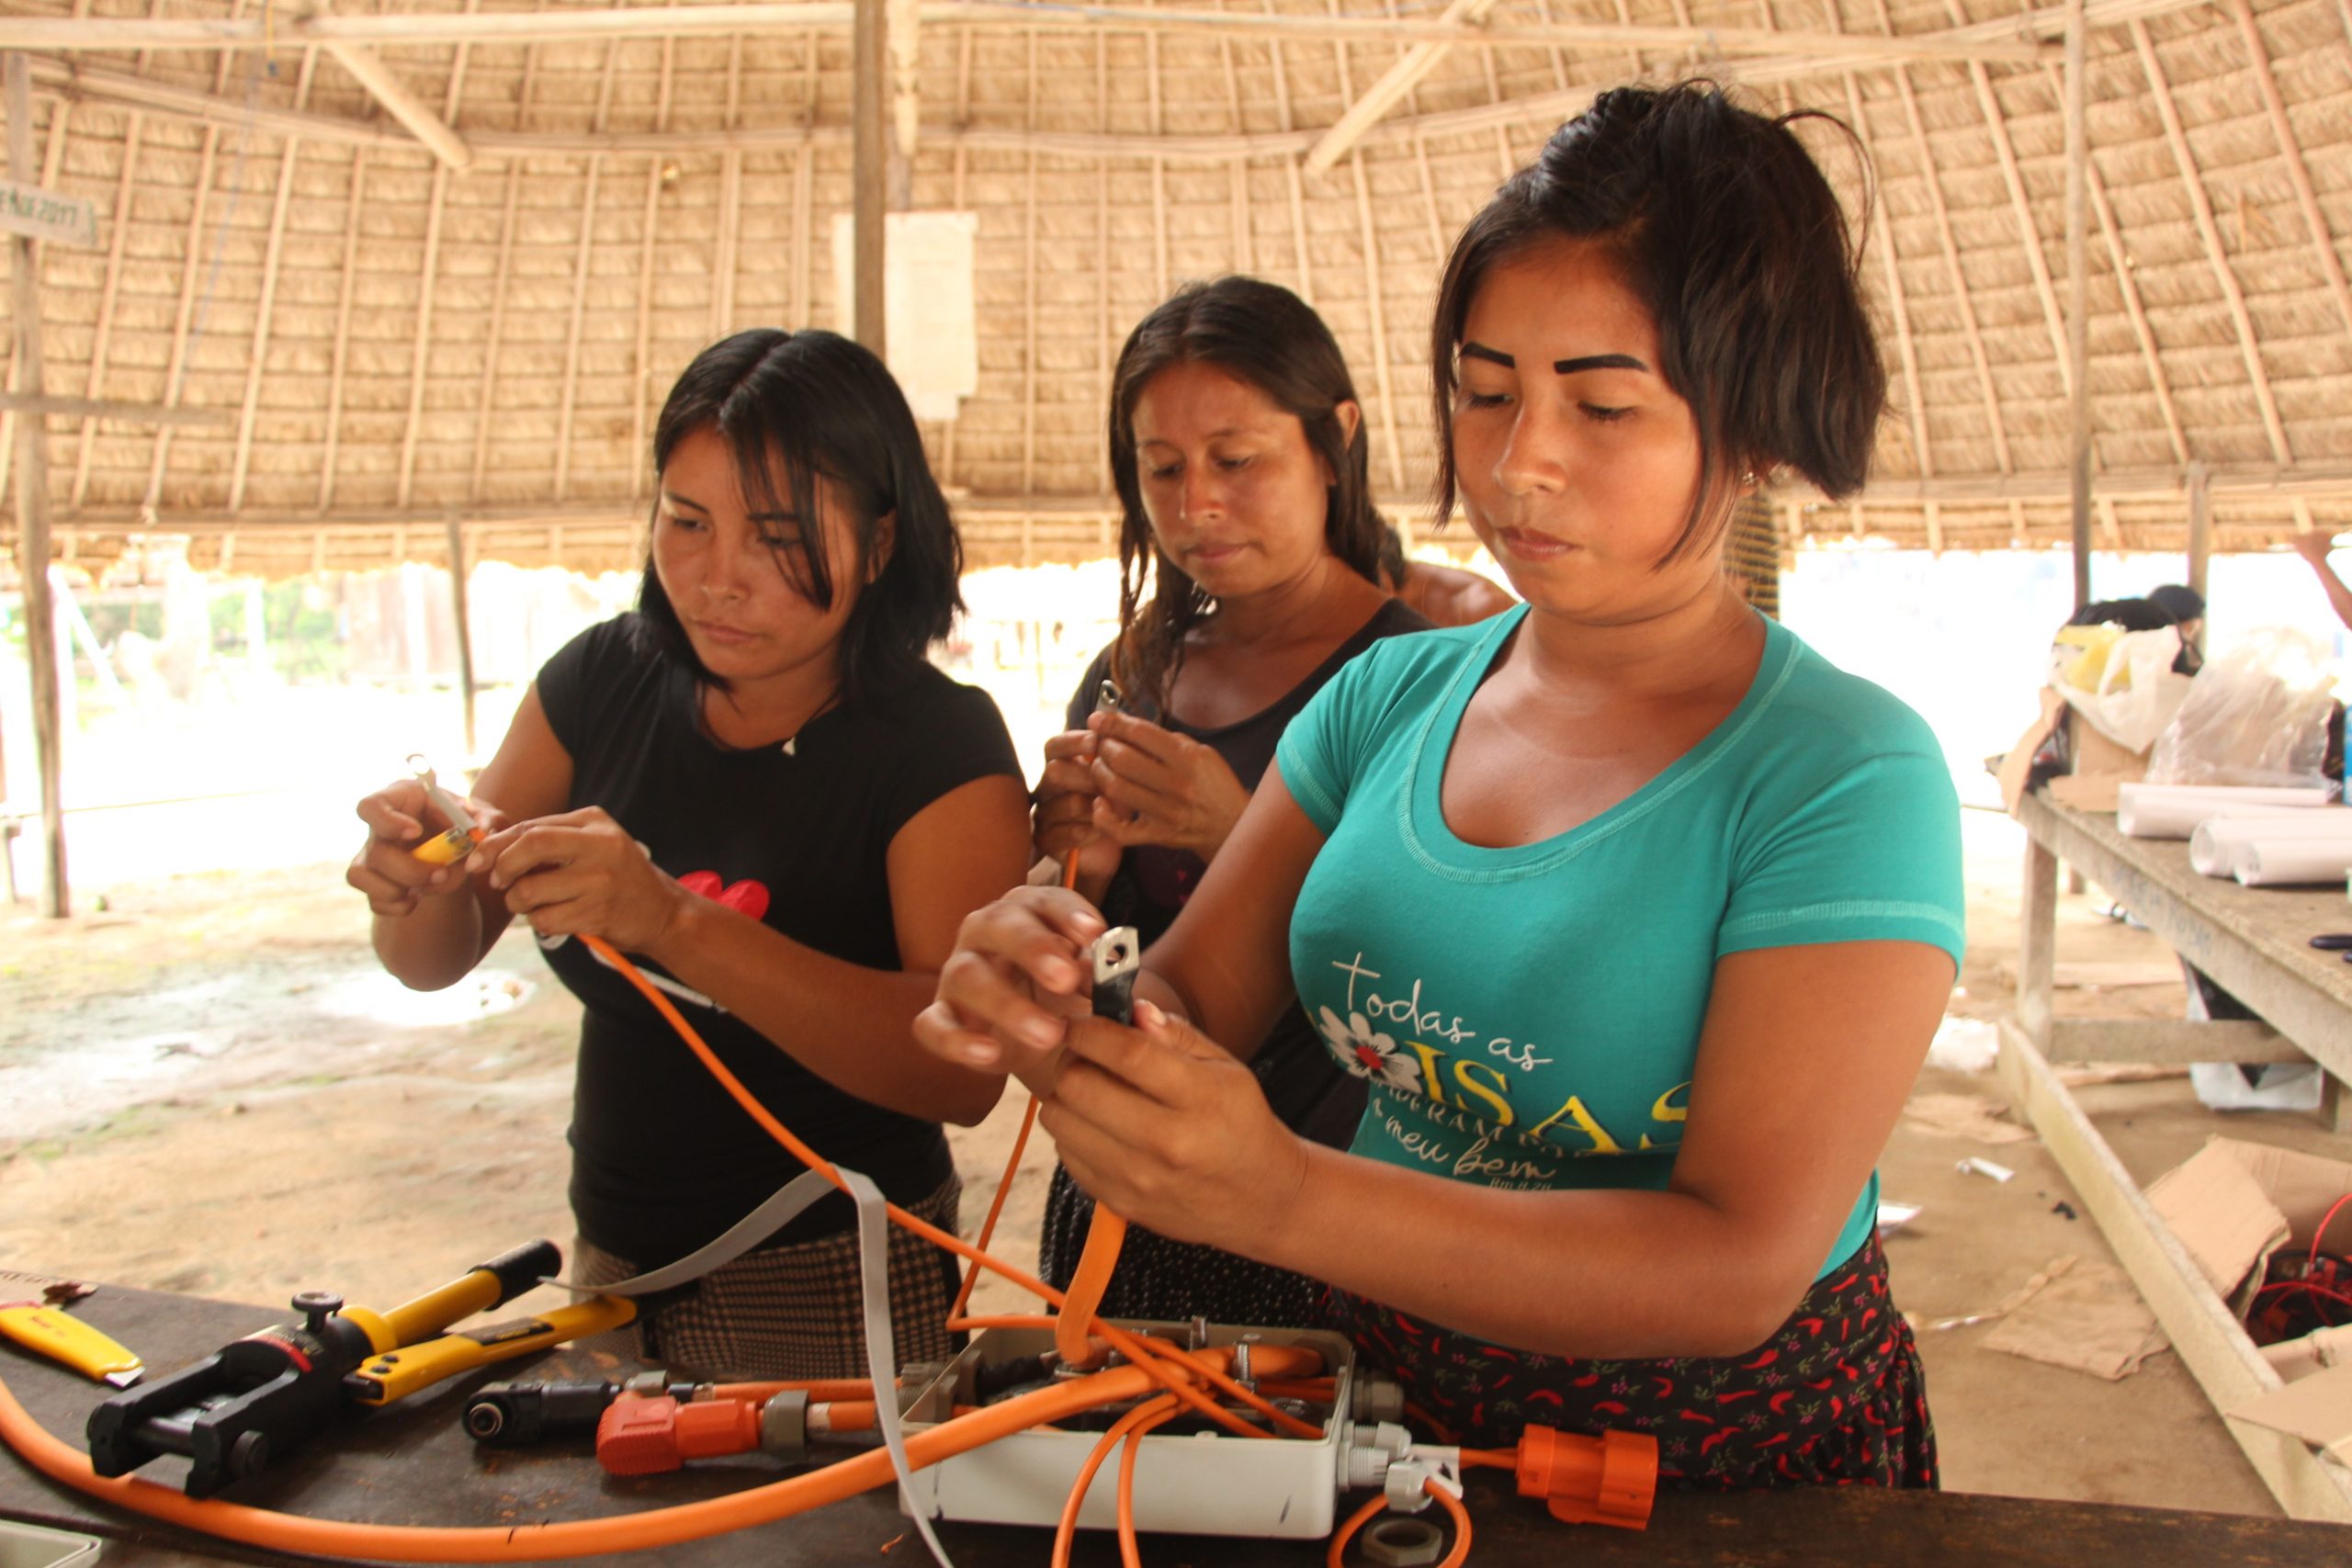 Three women working on a project together